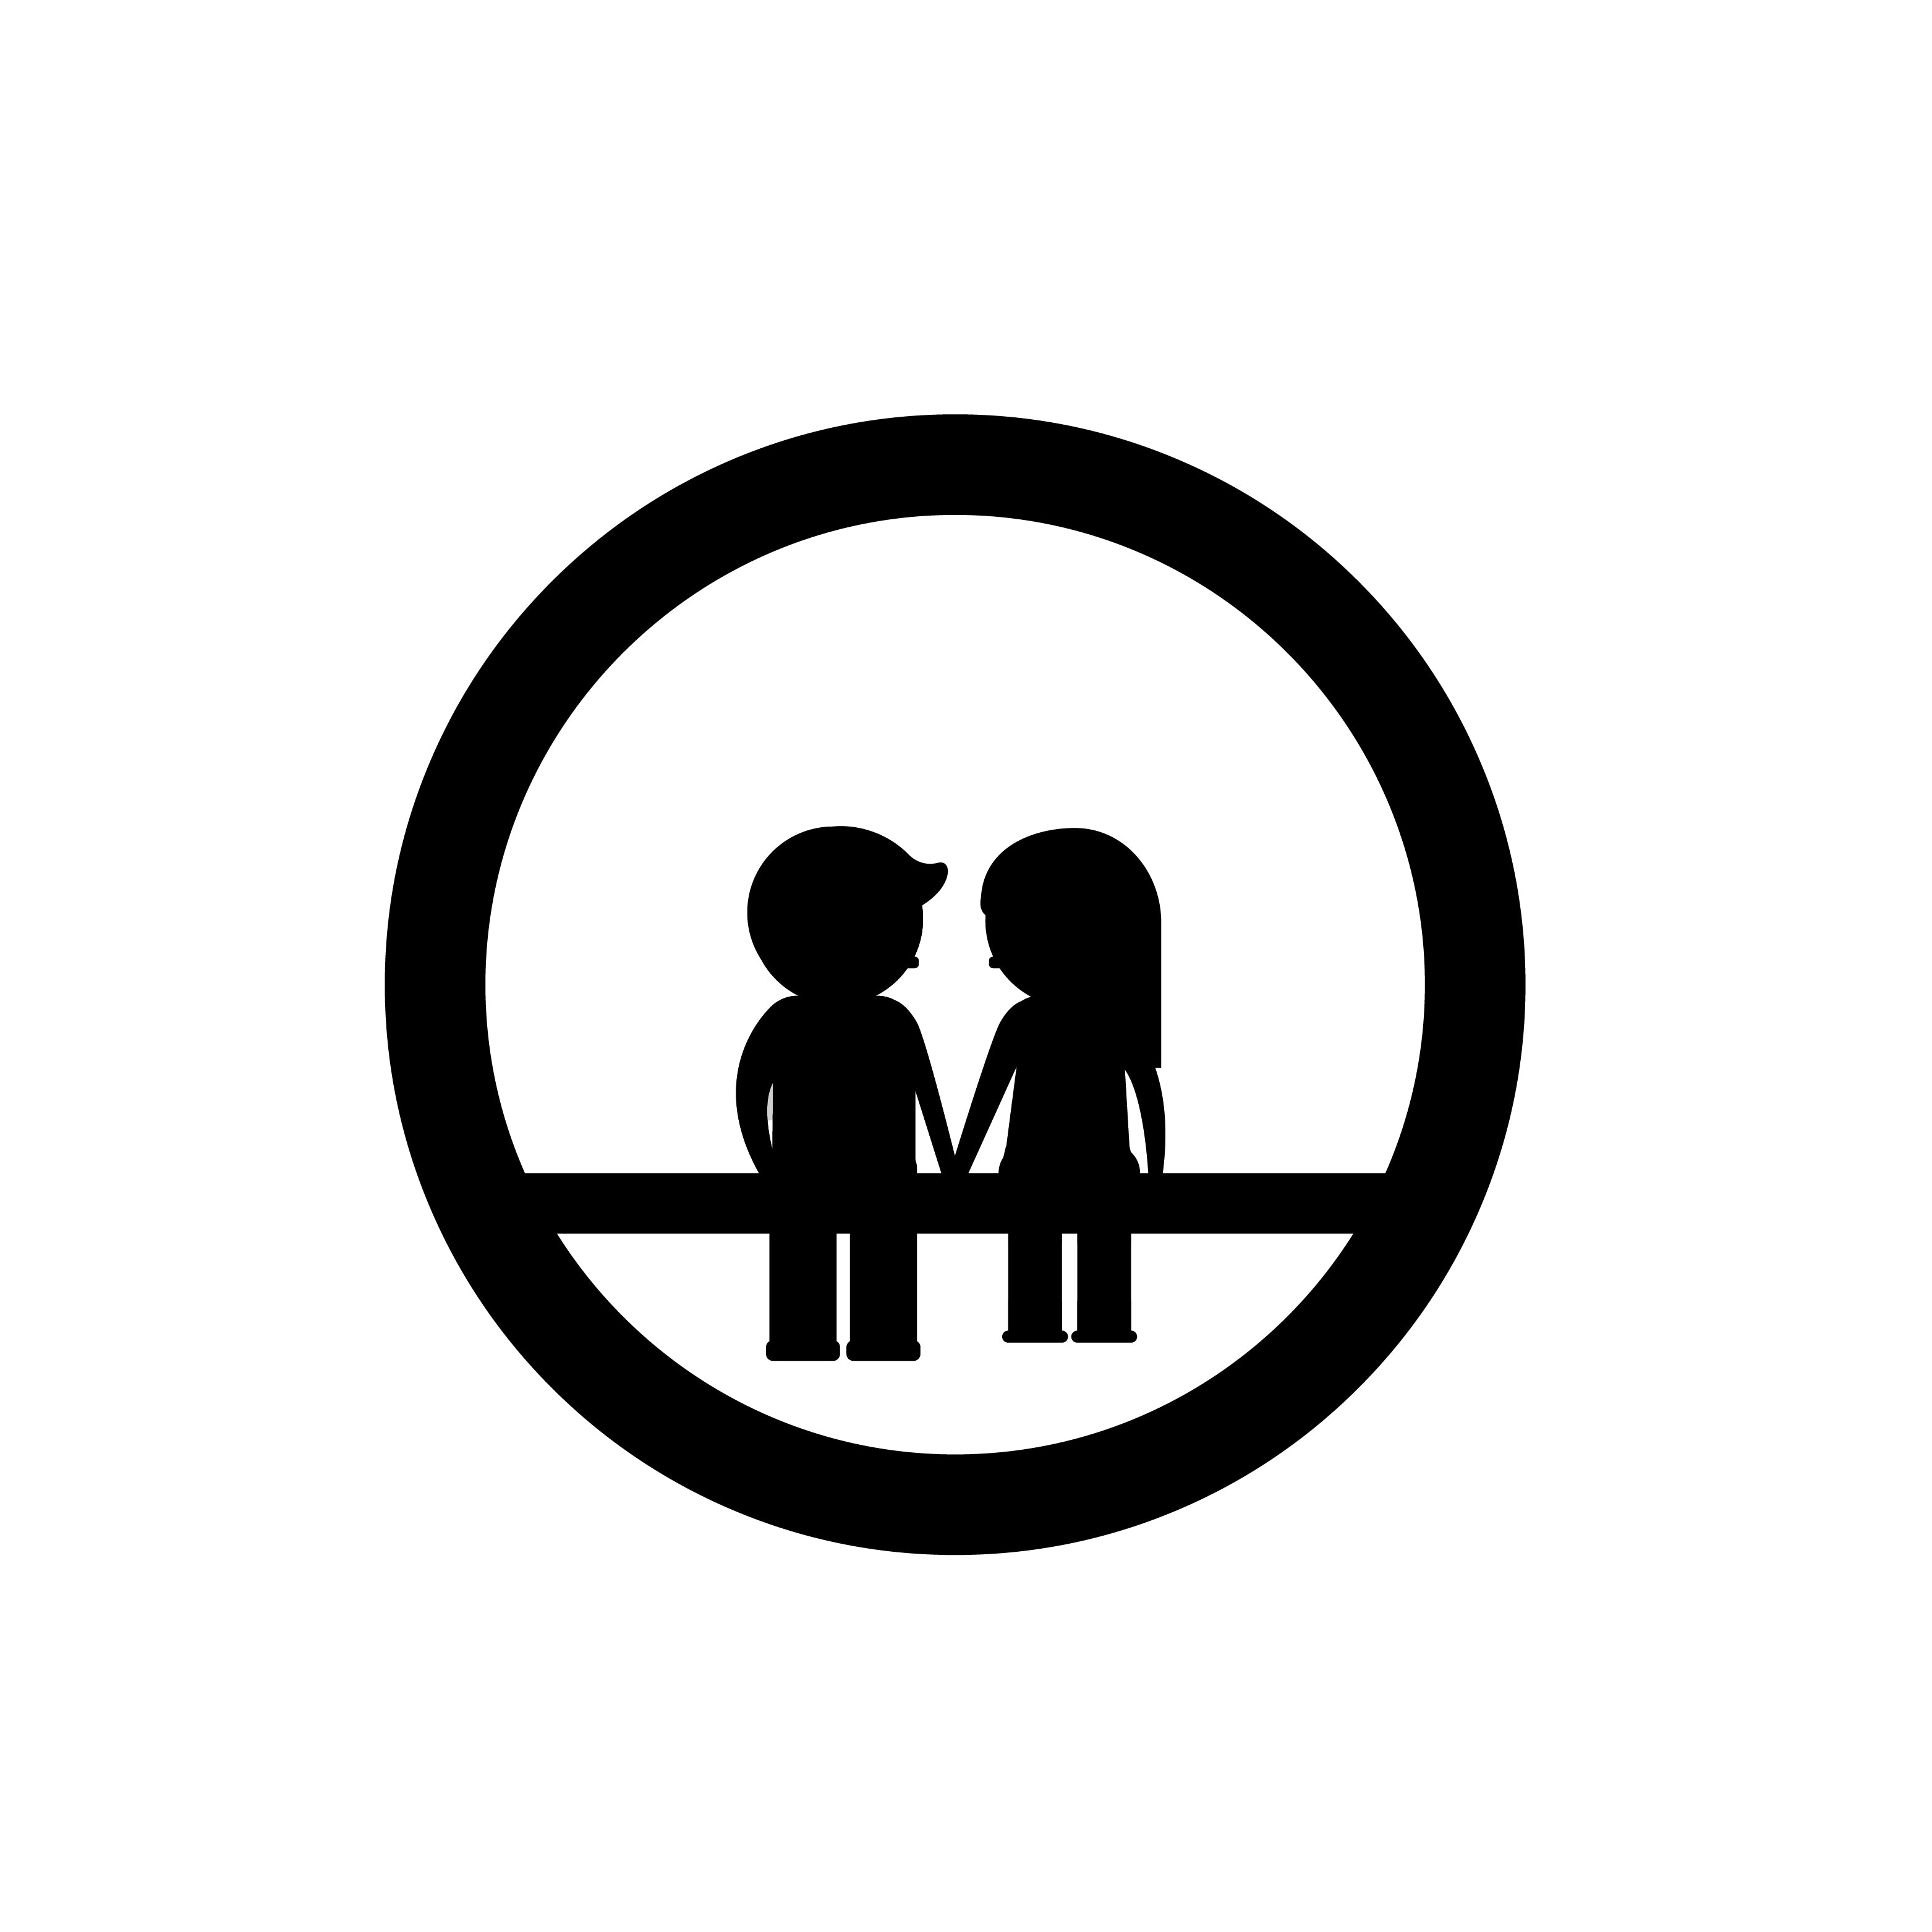 "Couple sitting on Bench" Black Engineered Wood Wall Art Cutout, Ready to Hang Home Decor 2